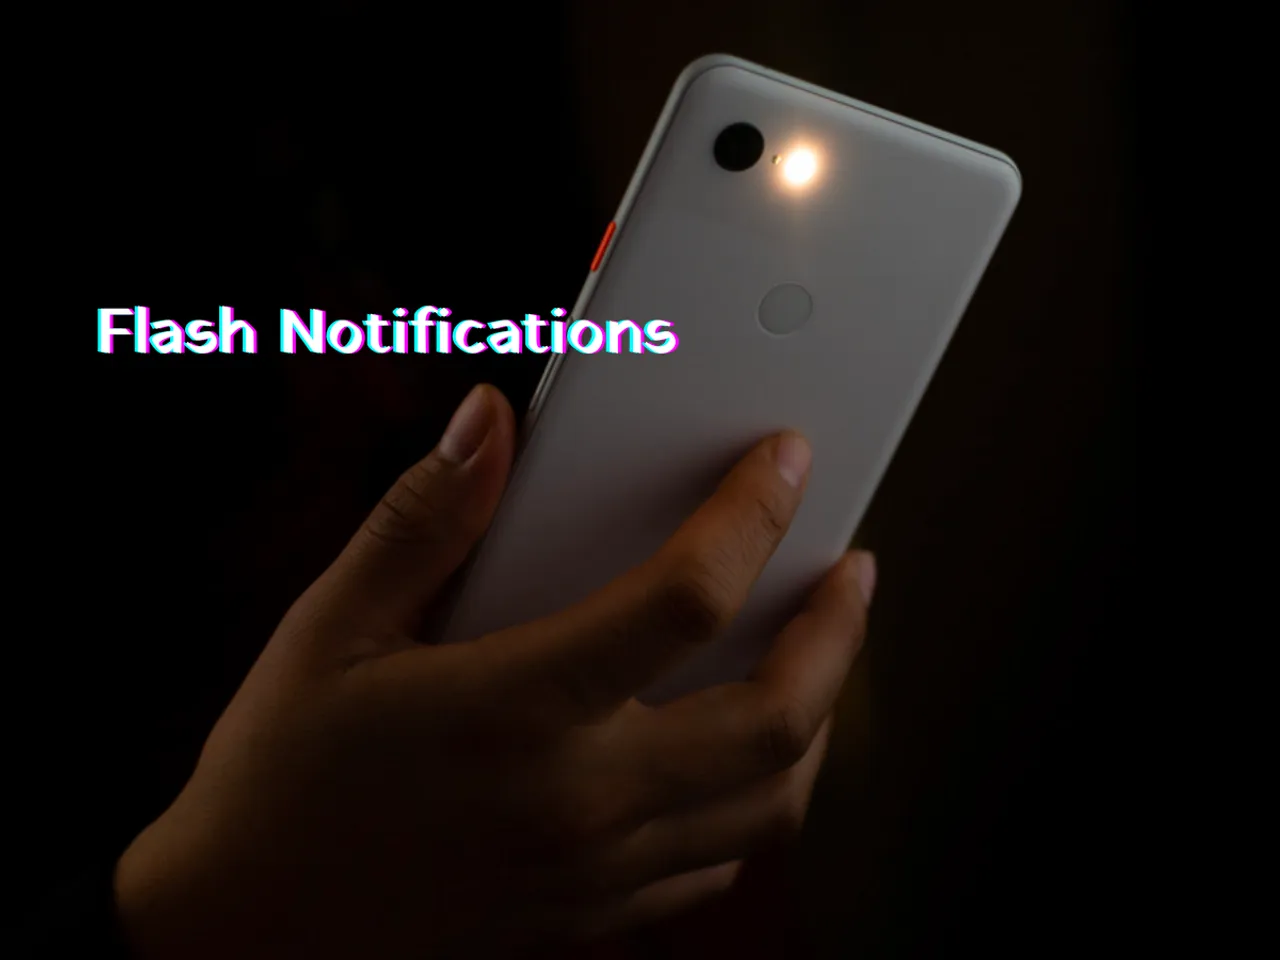 How to Set Up Flash Notifications on Your Android Phone